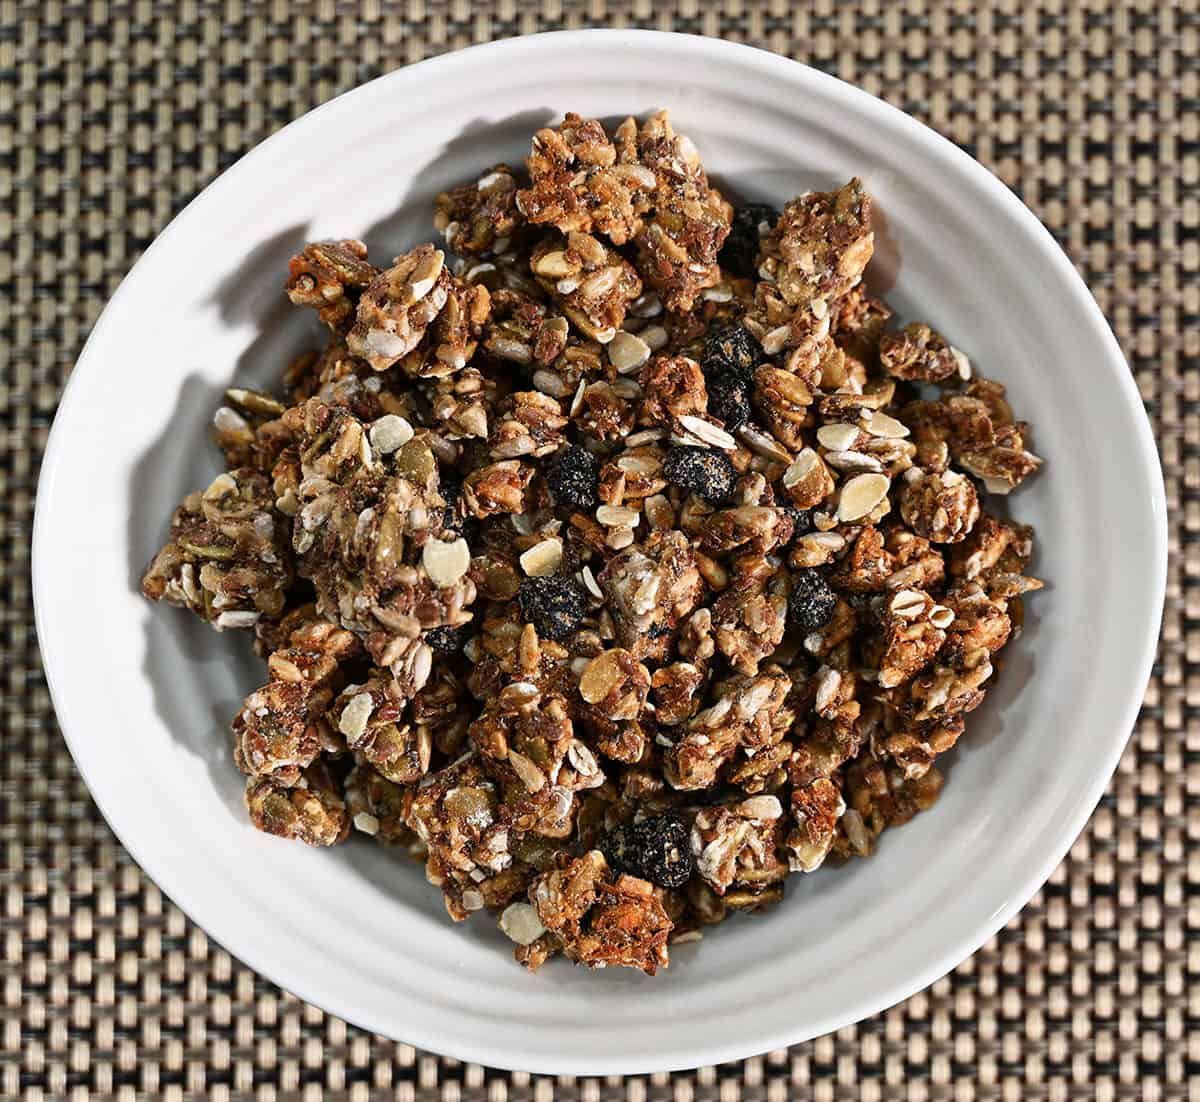 Top down image of a white bowl filled with granola.